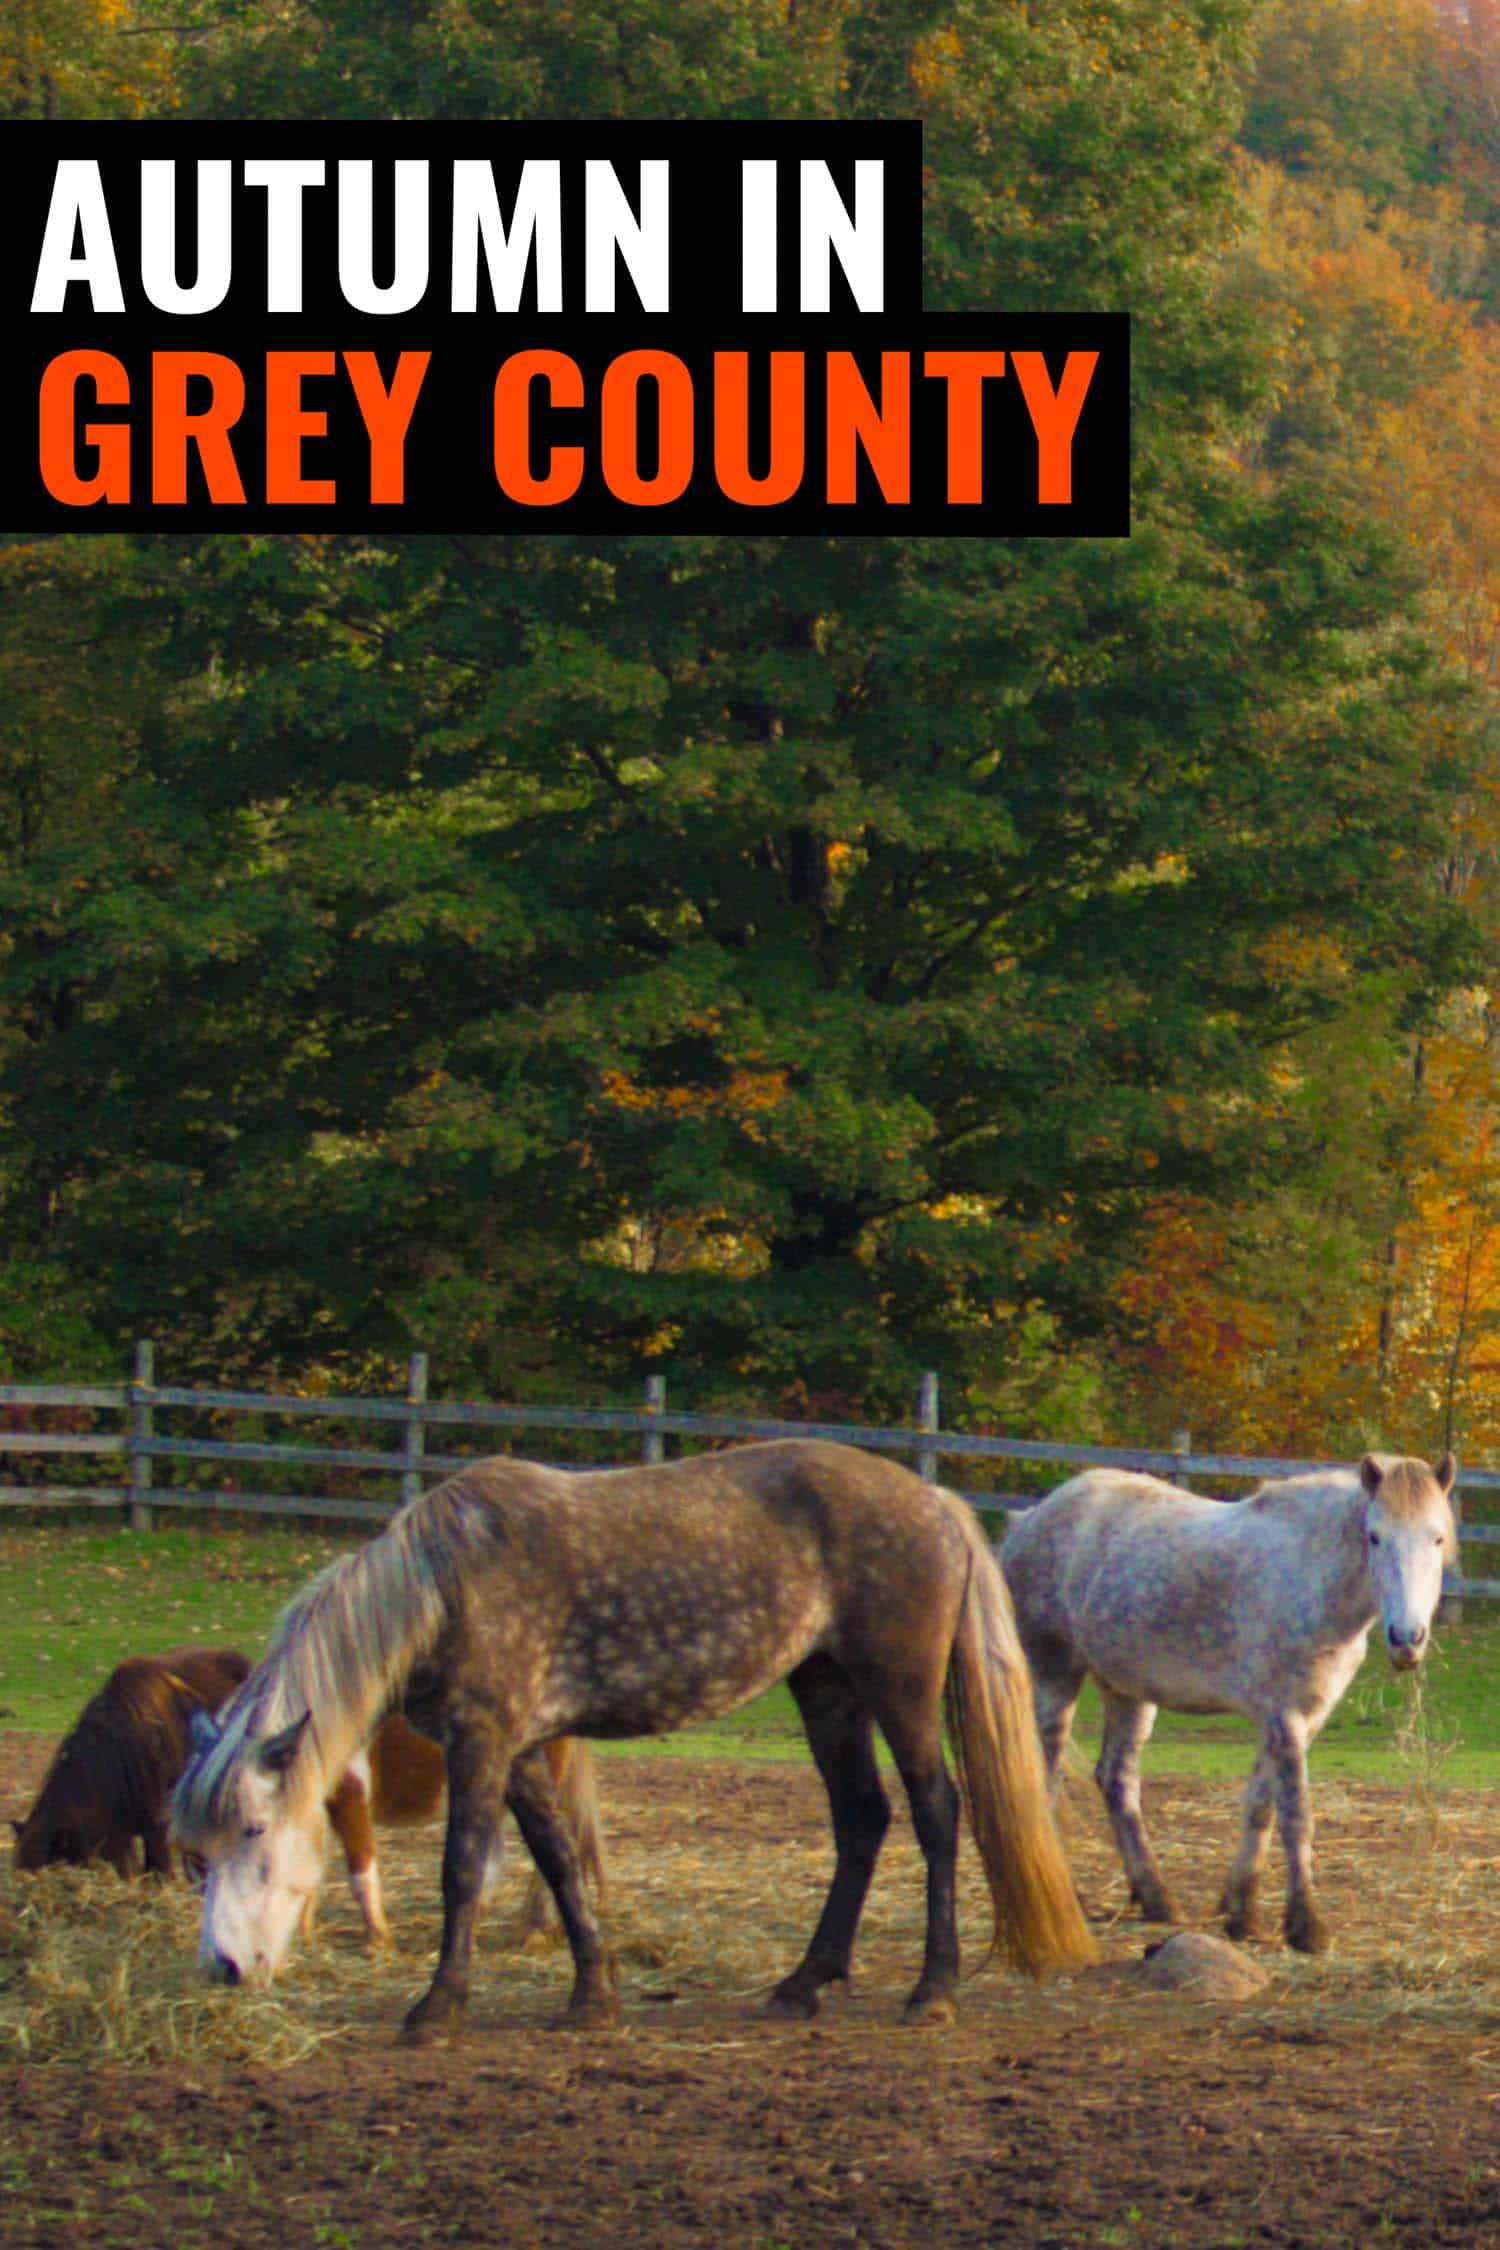 Plan the ultimate road trip with an autumn colors tour in Grey County.